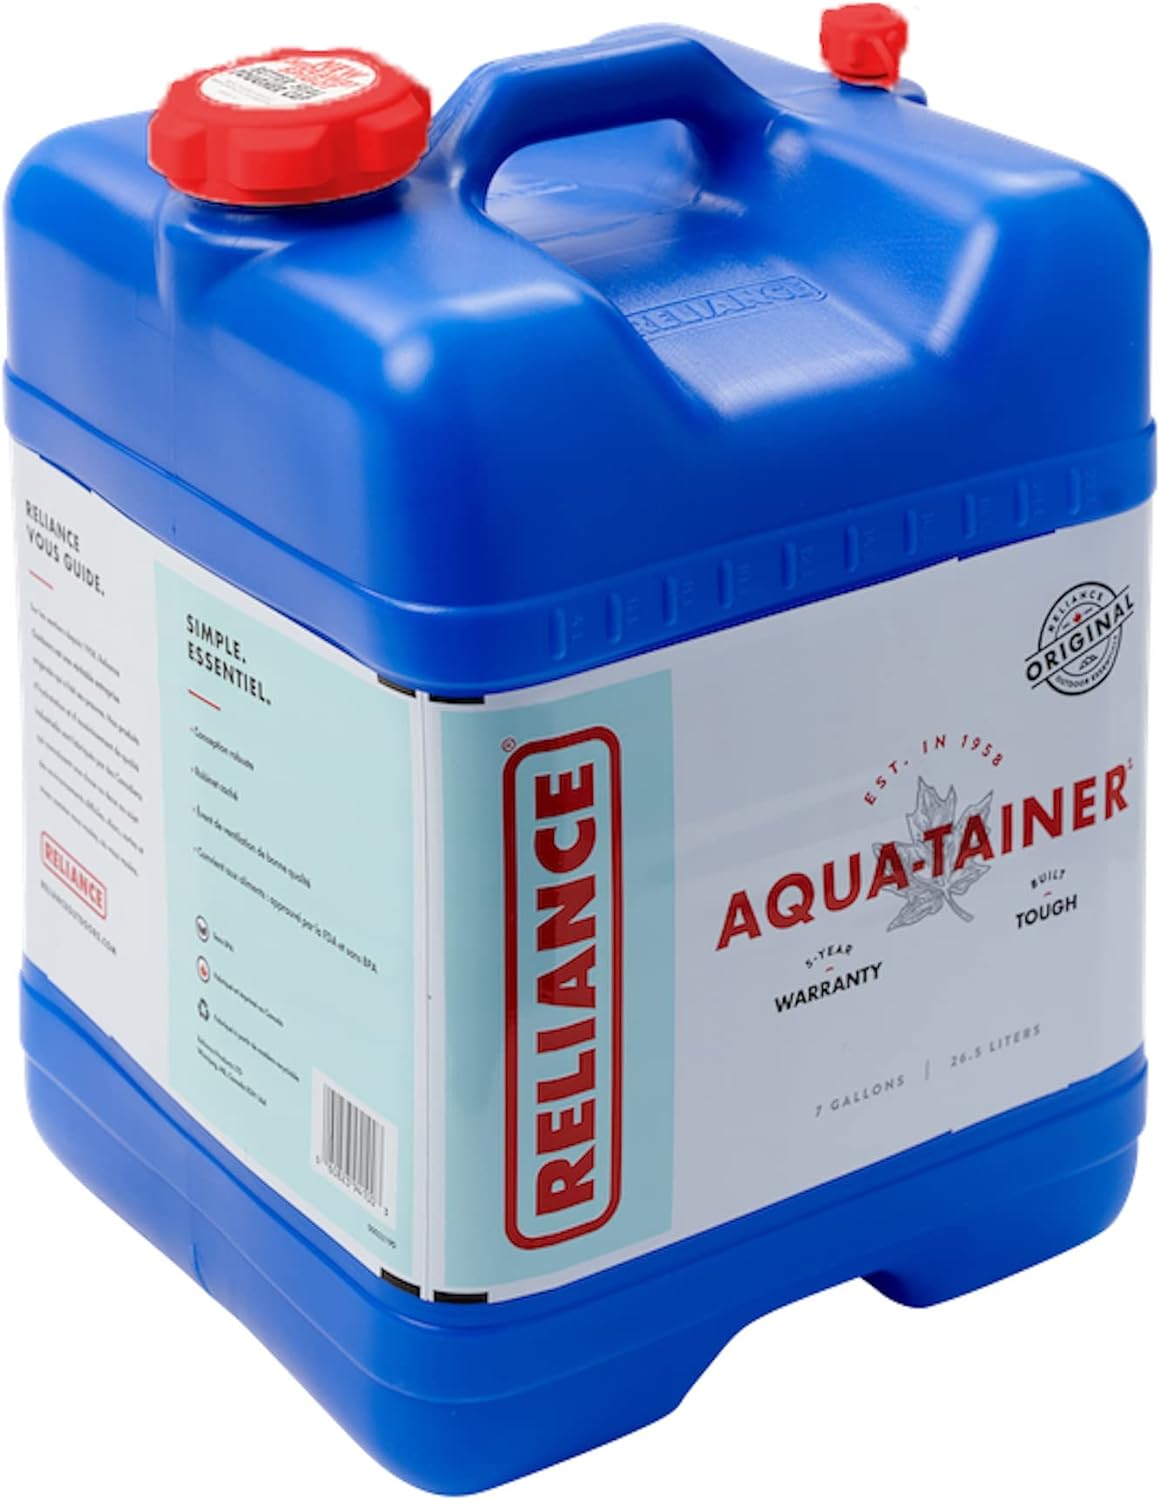 Reliance Products Aqua-Tainer Review